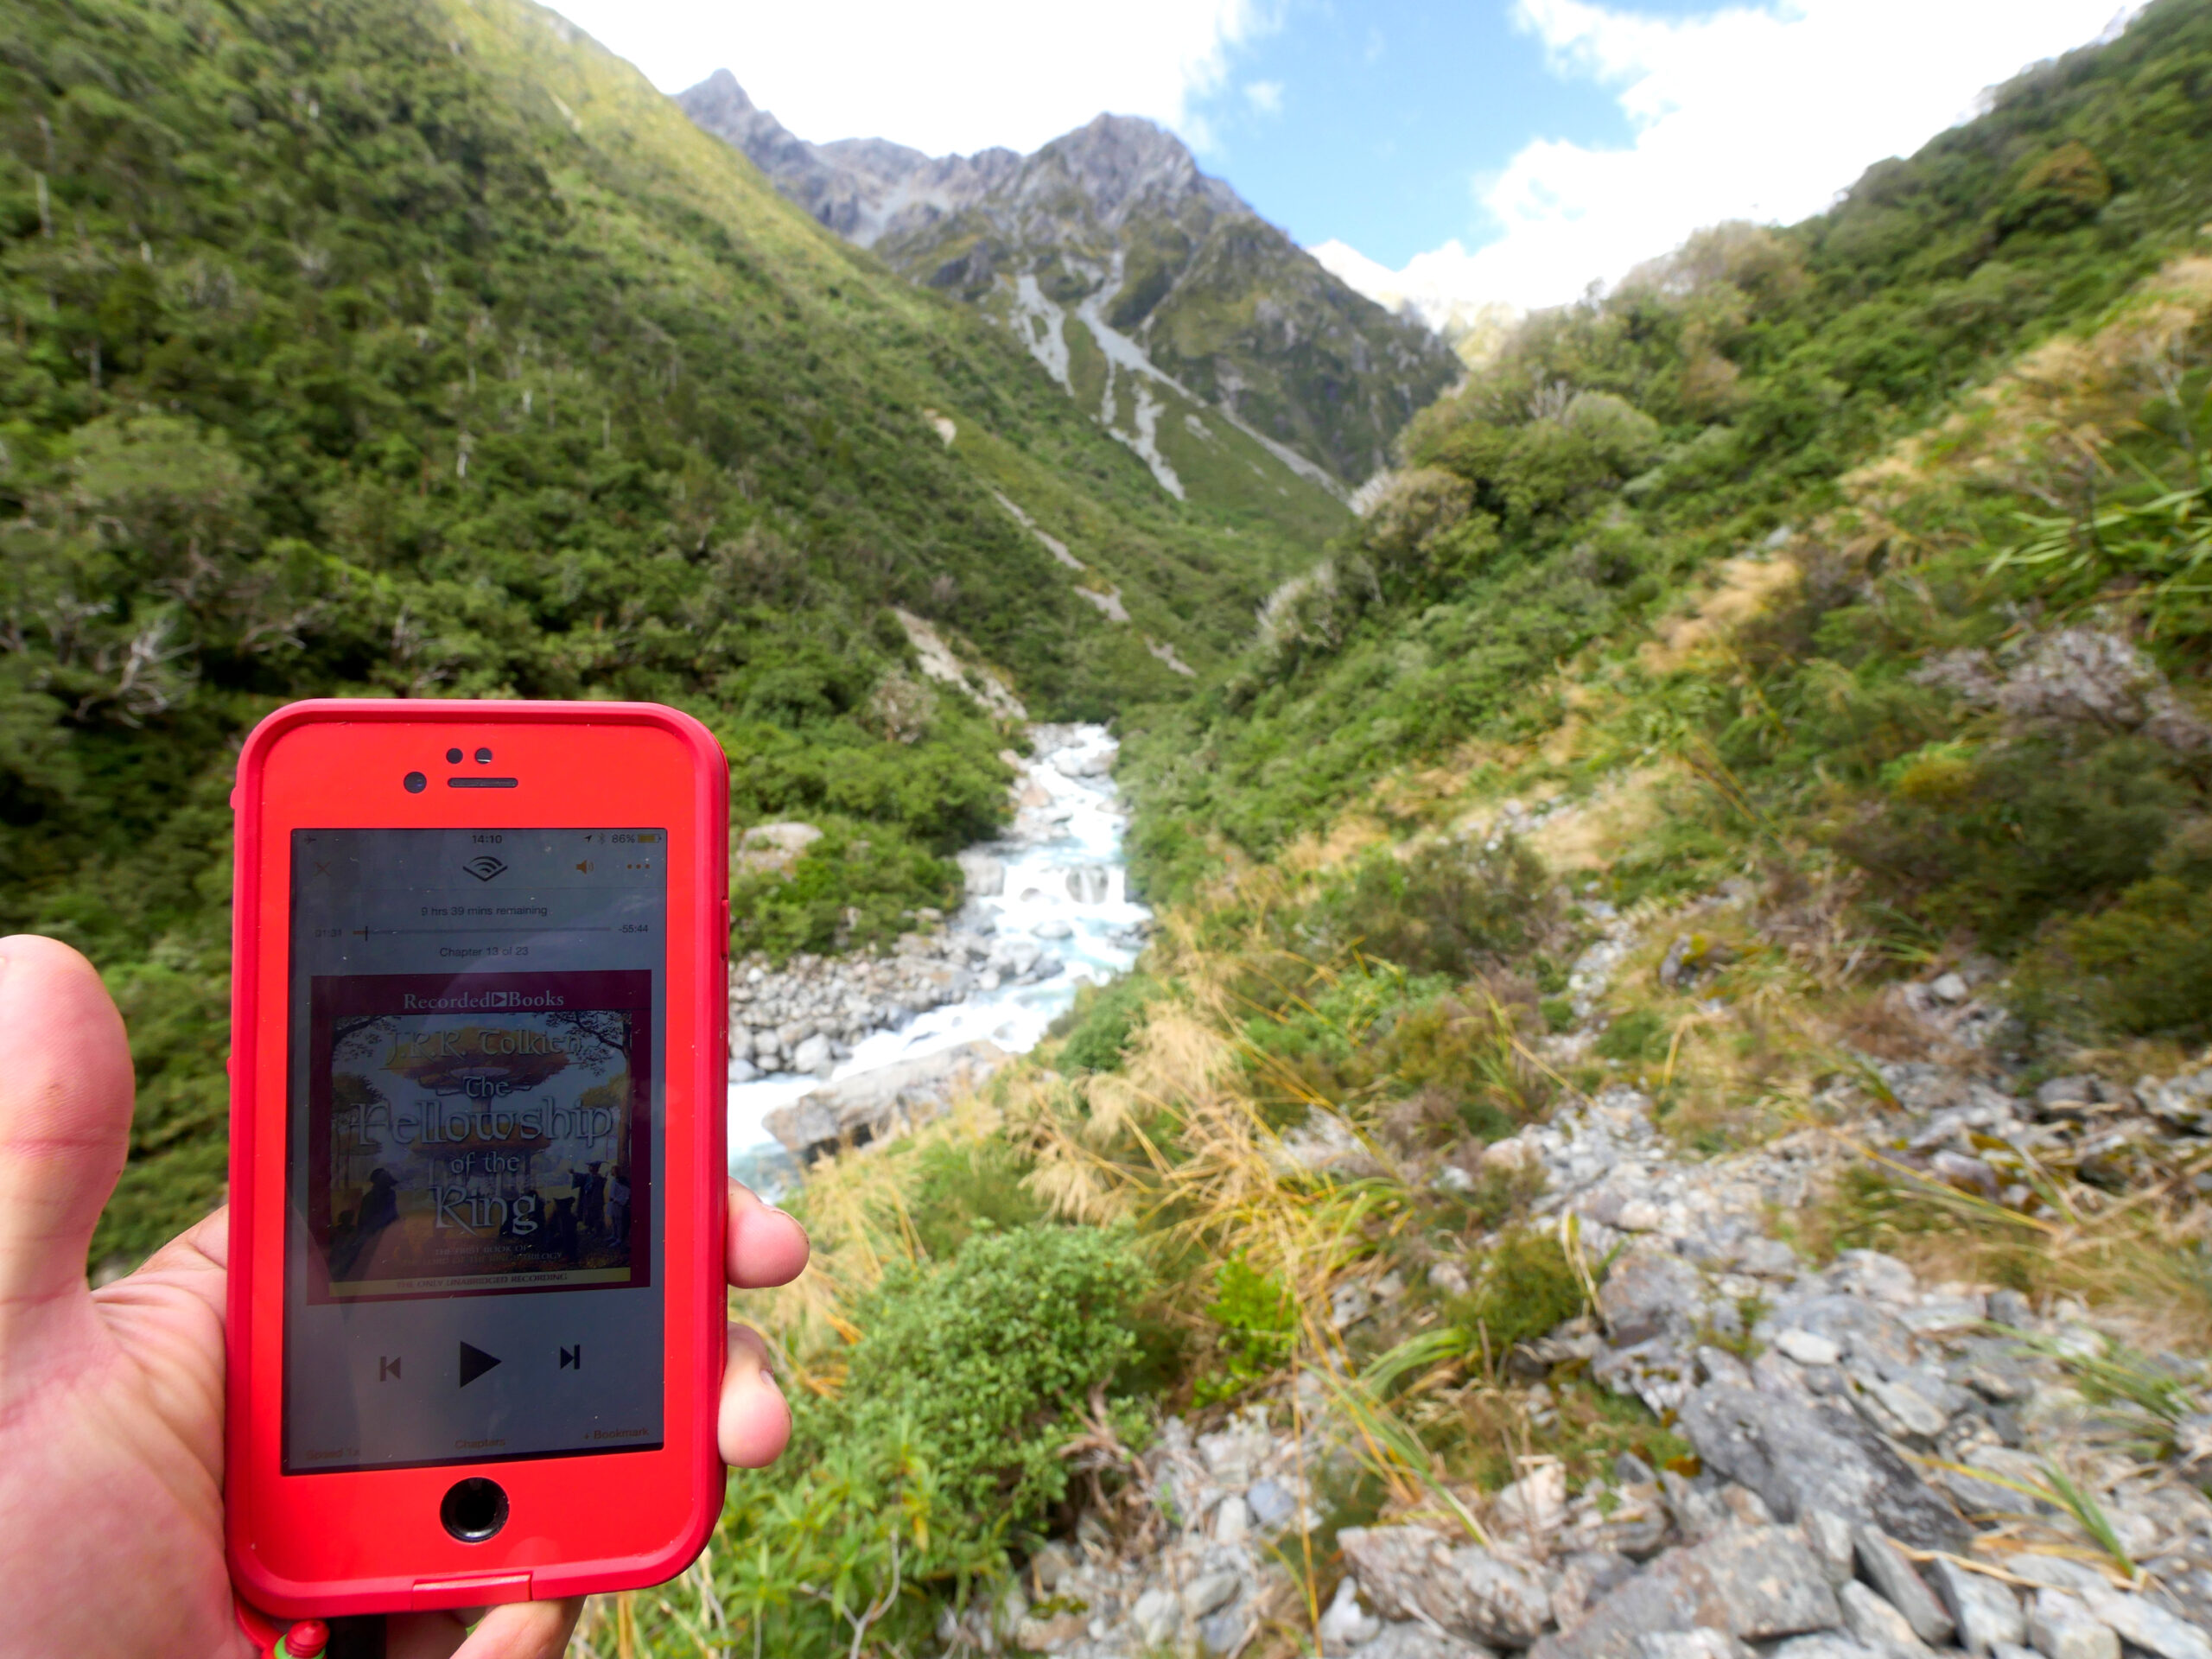 While hiking in Arthur's Pass National Park, I listened to the Lord of the Rings audiobook using my phone.